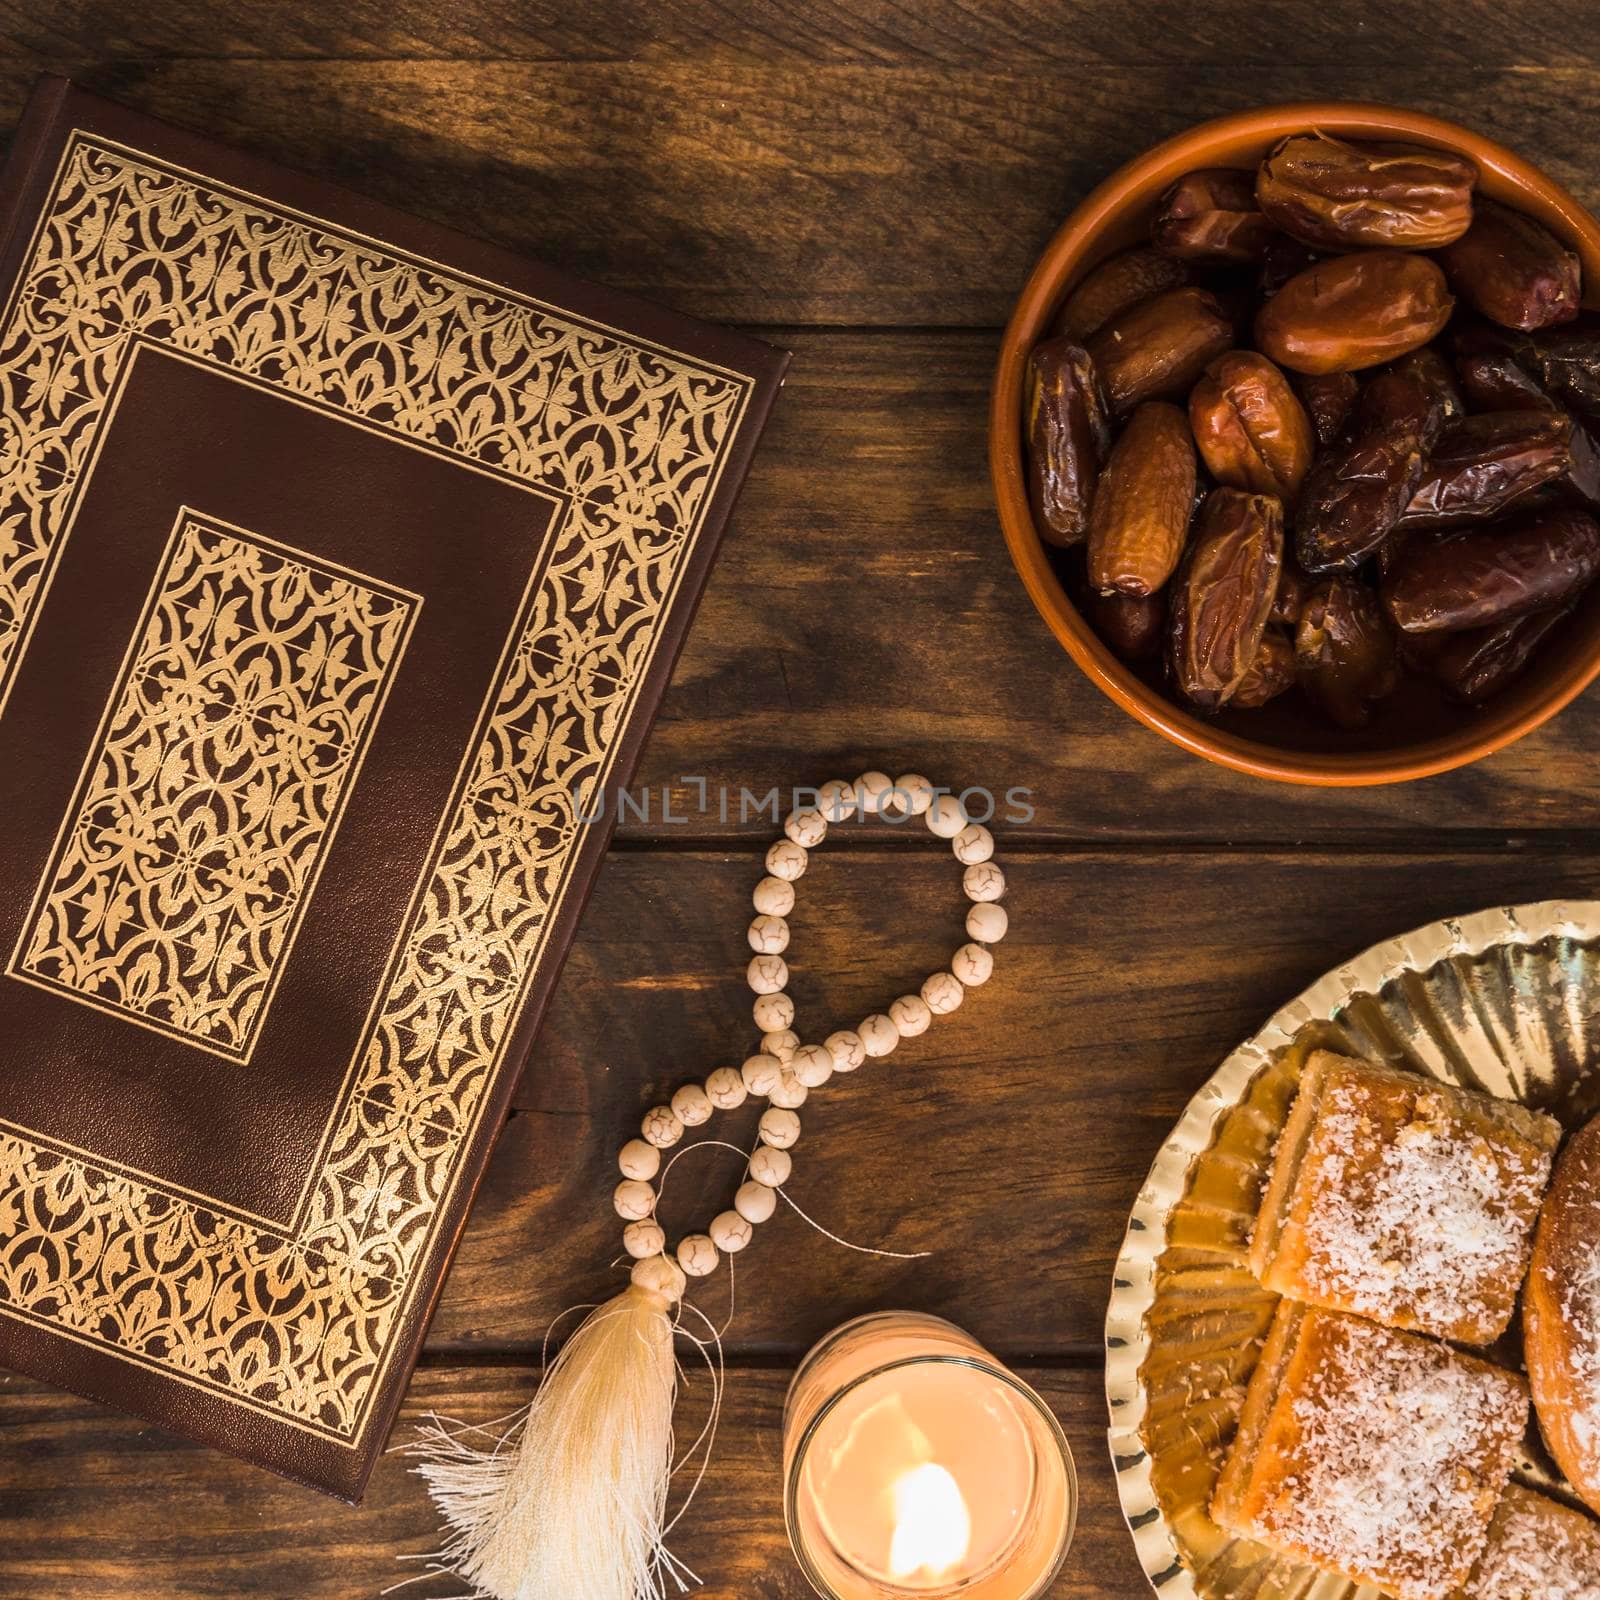 desserts candle near beads quran. High quality photo by Zahard